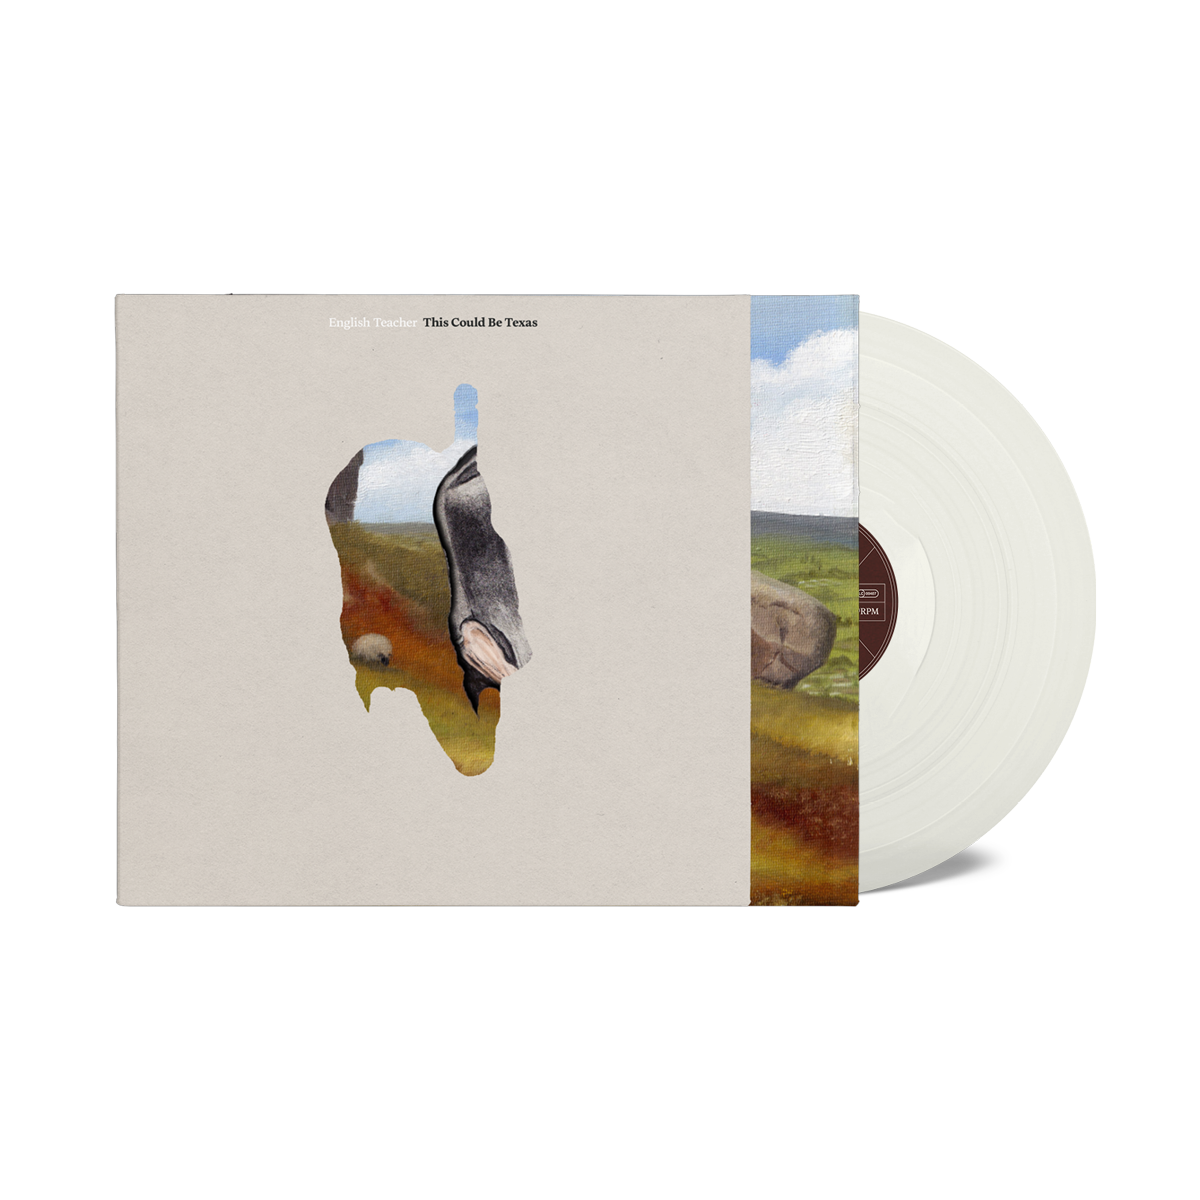 English Teacher - This Could Be Texas: Store Exclusive Milky White LP